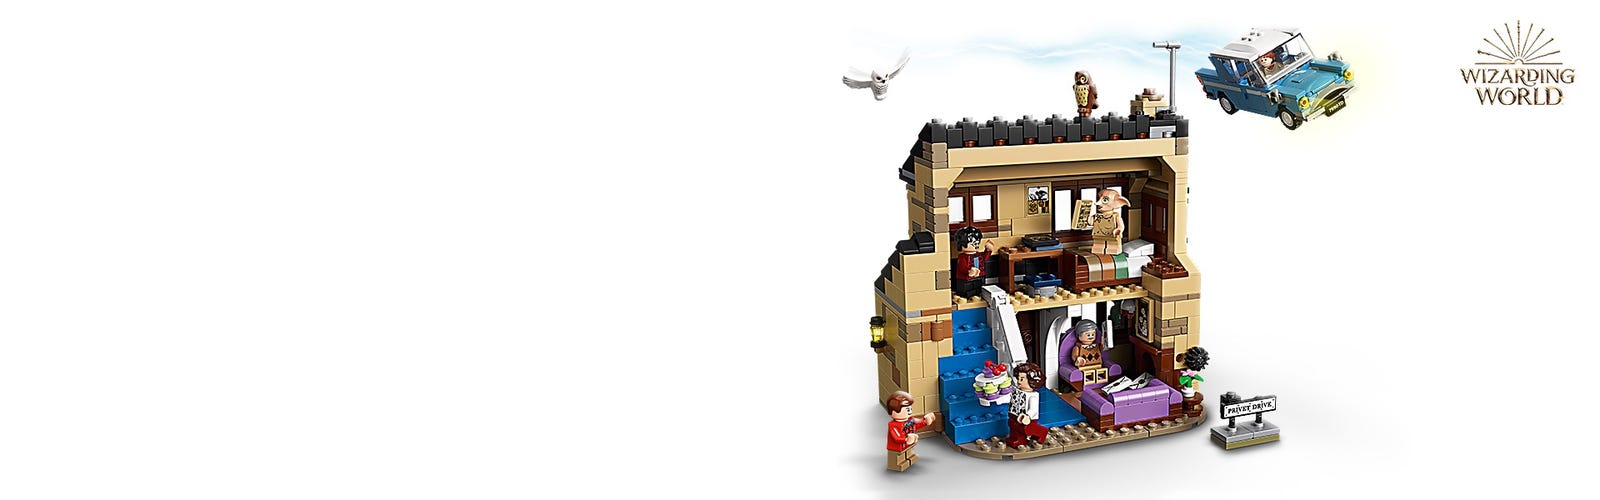 LEGO Harry Potter 4 Privet Drive 75968 House and Ford Anglia Flying Car  Toy, Wizarding World Gifts for Kids, Girls & Boys with Harry Potter, Ron